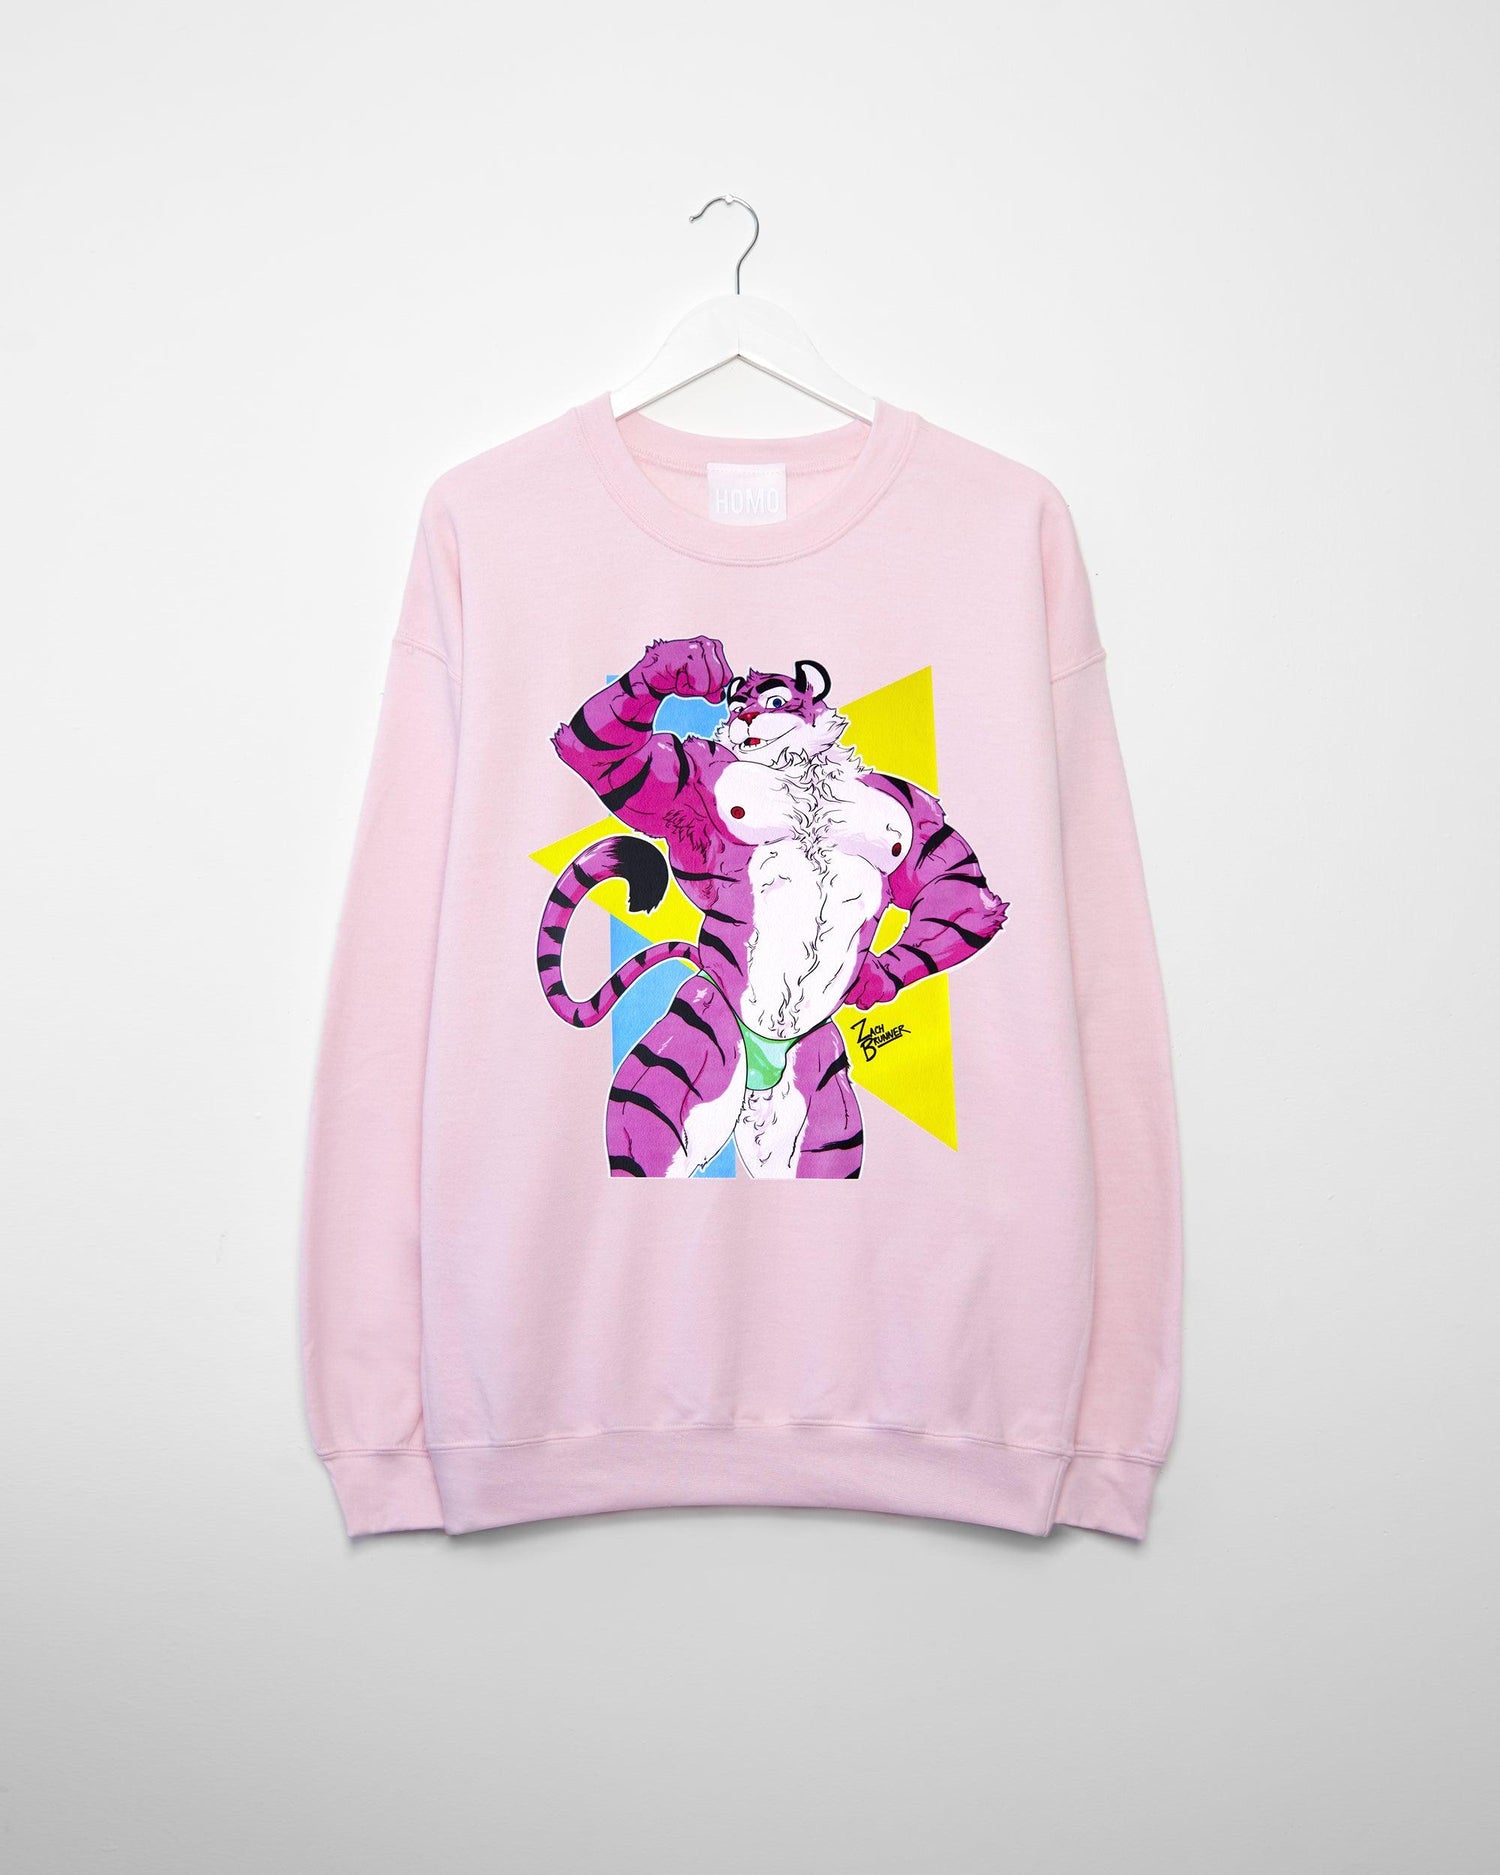 Rocky the tiger, always the life of the party - sweatshirt. - HOMOLONDON